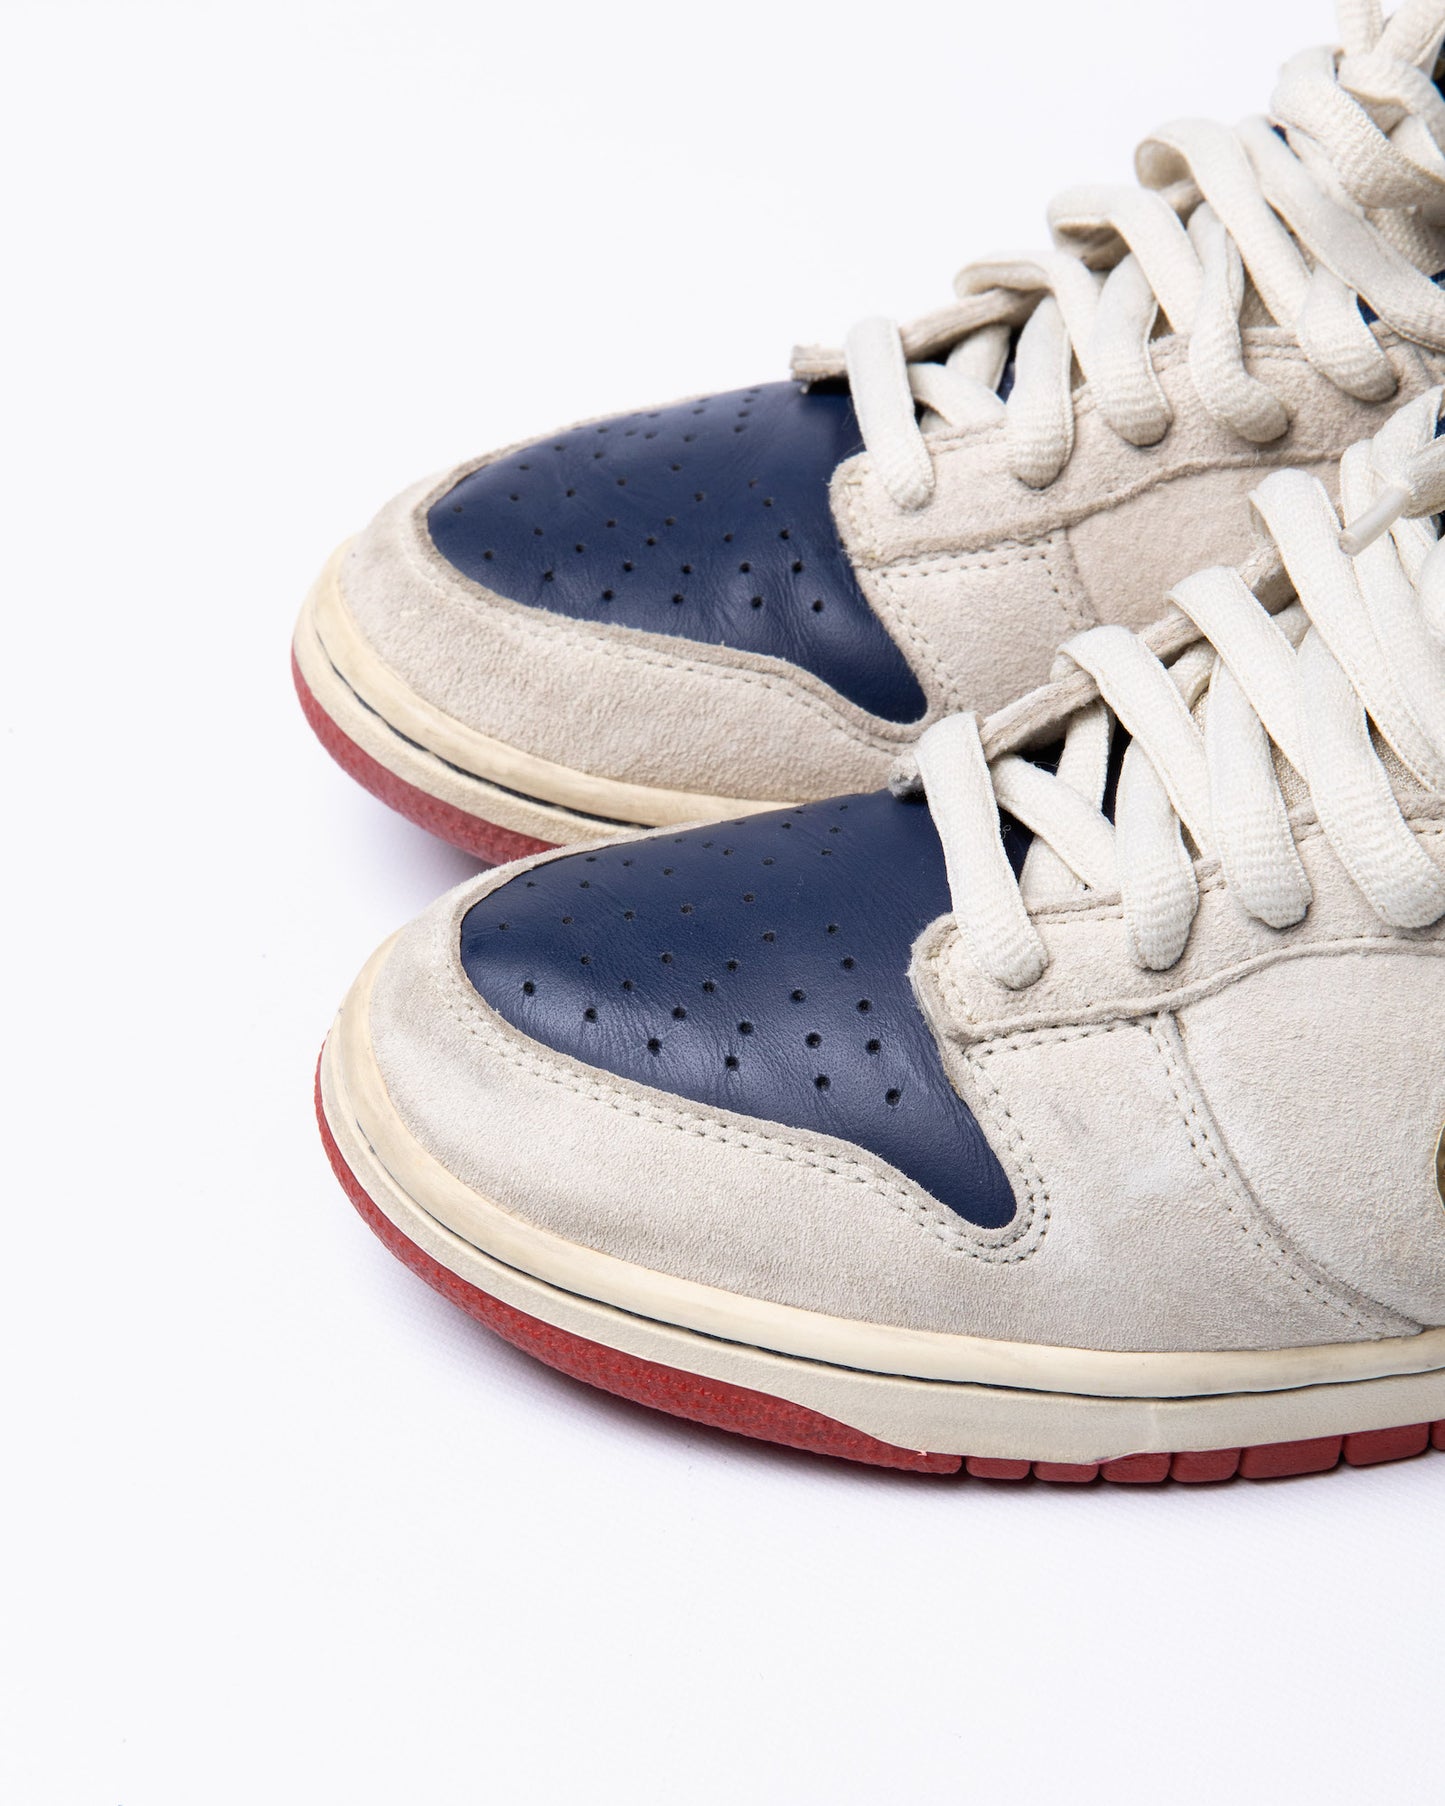 Nike SB Dunk low " Old Spice "